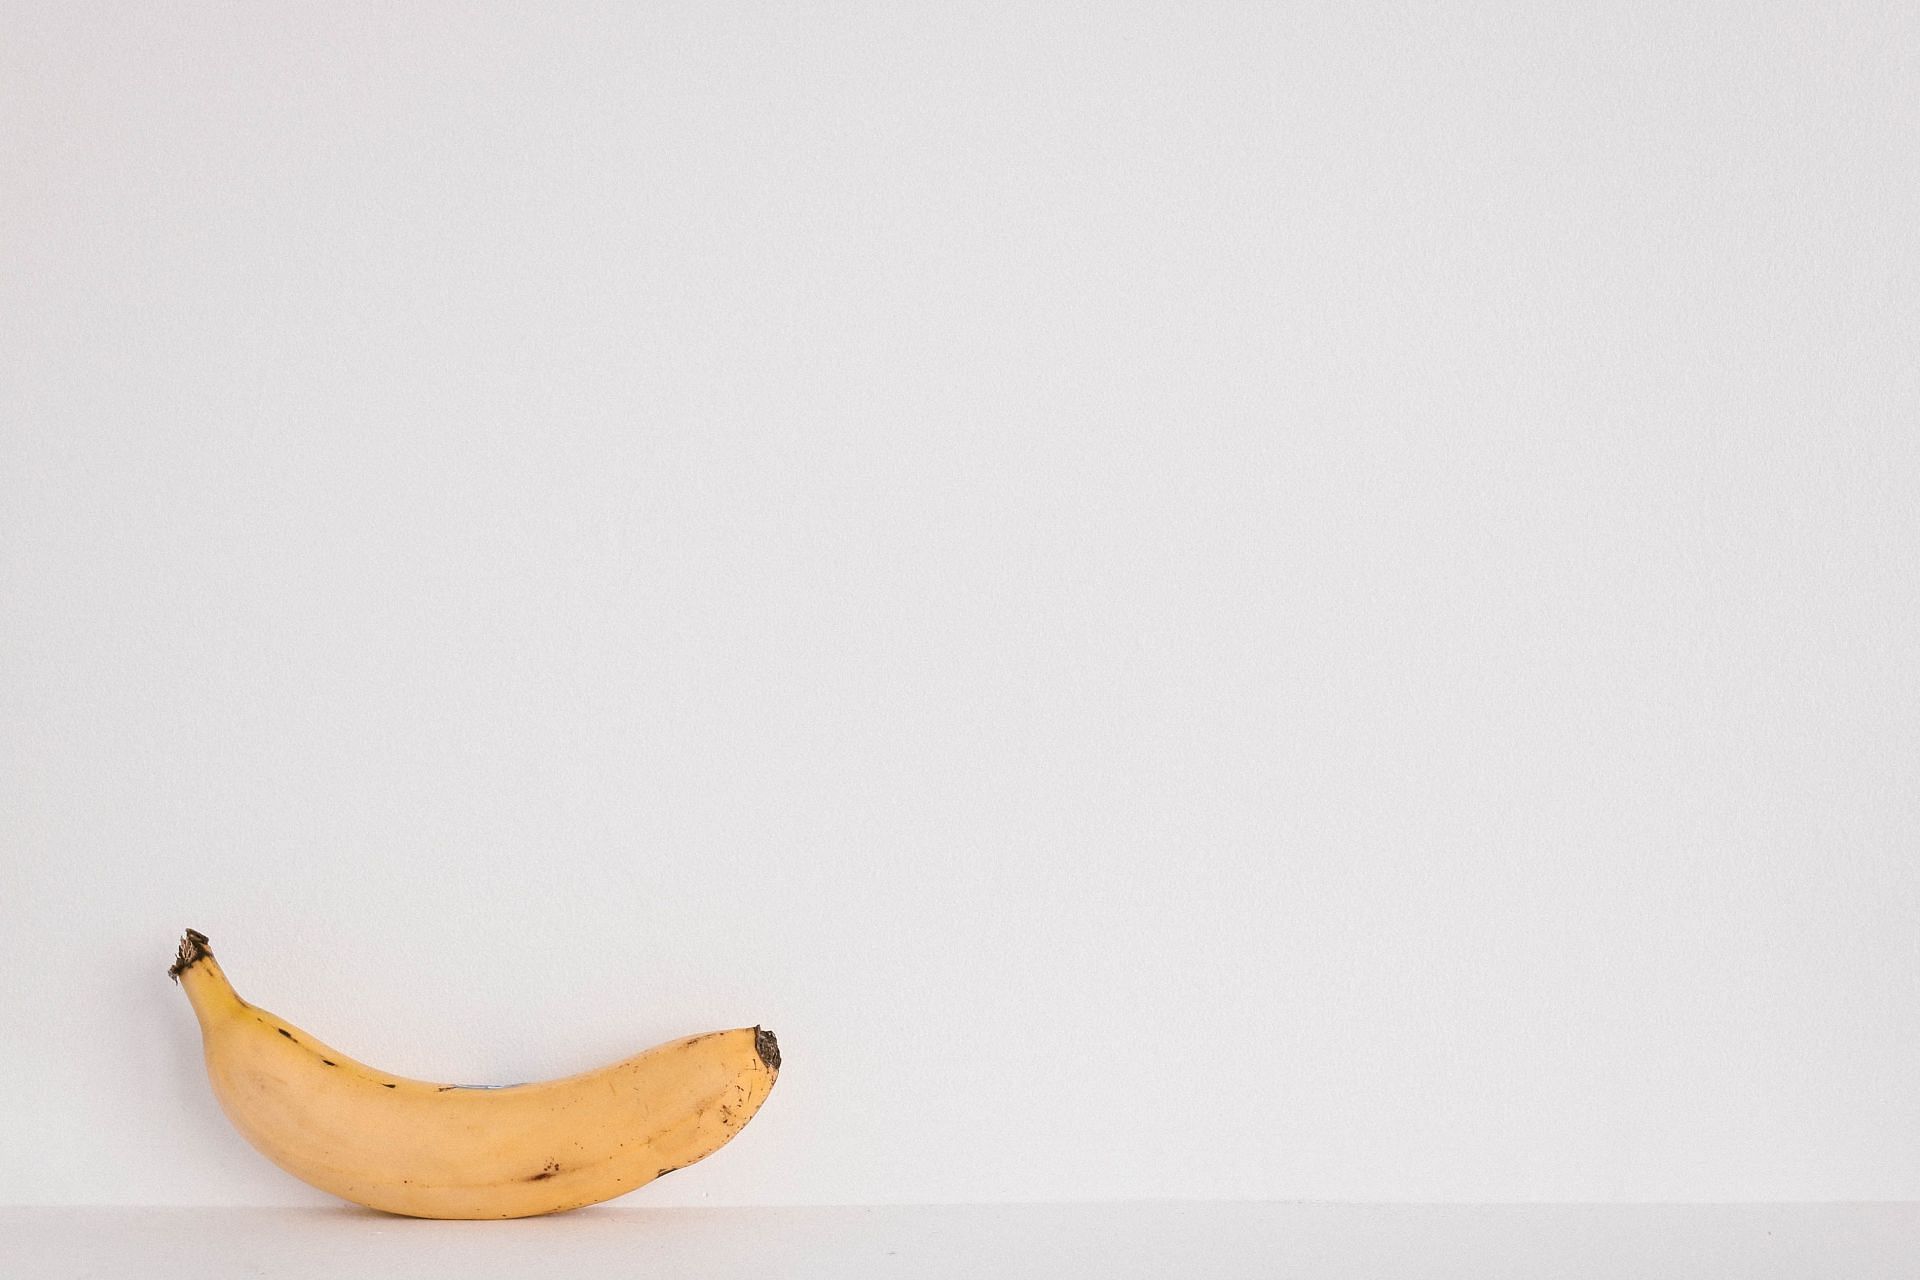 Calories in one banana and myths. (Image via Pexels/ Andrea Ch)